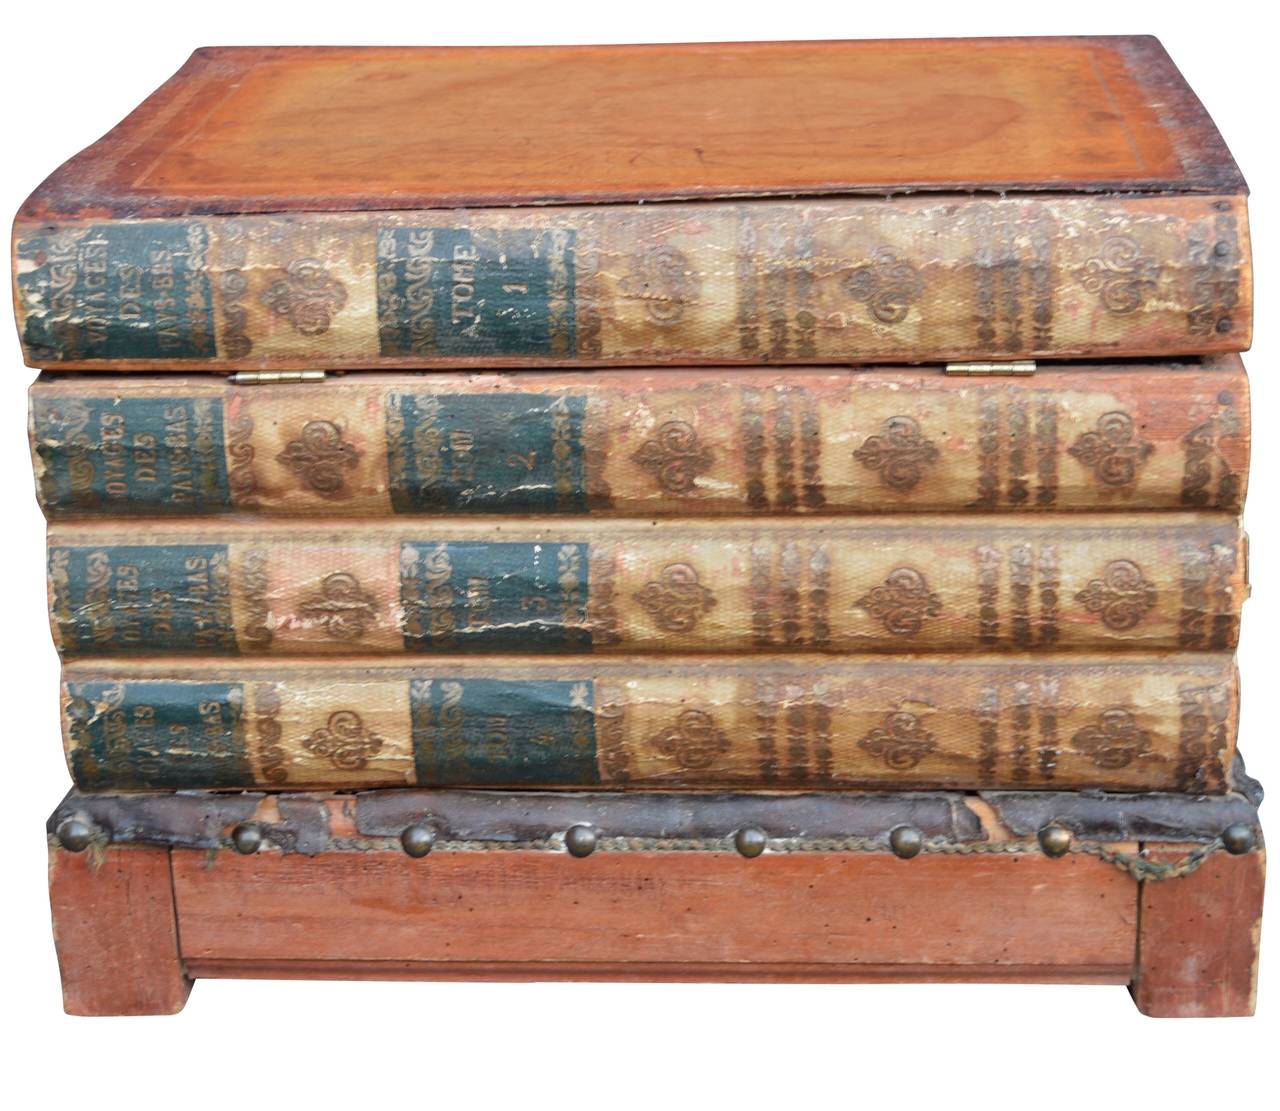 Leather 19th Century Book Side-Table with Compartment